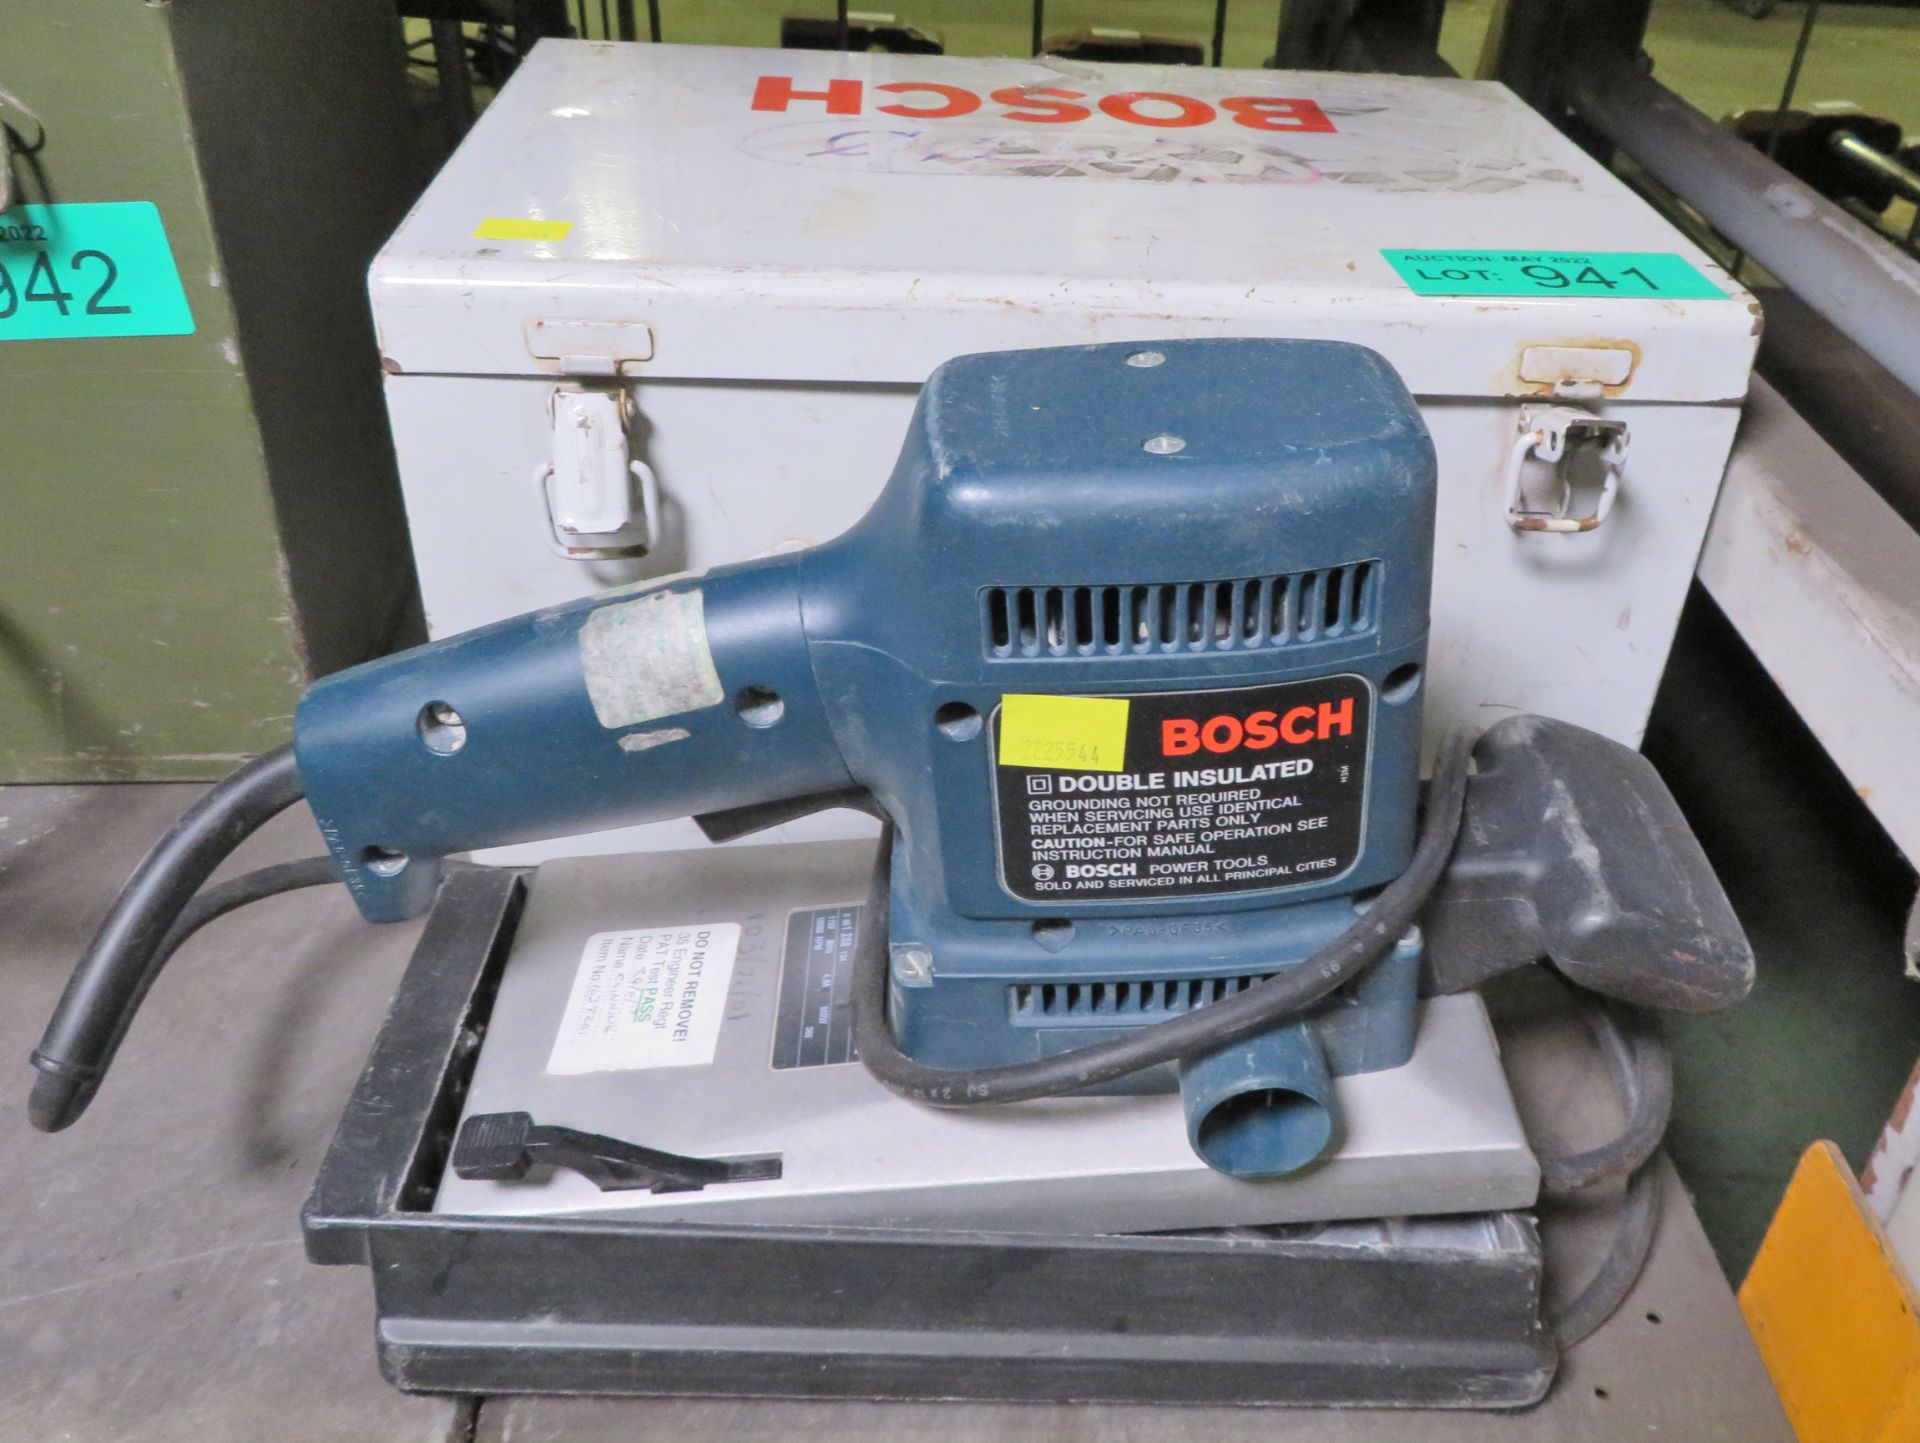 Bosch GSS 28 A Electric Oscillating Sander - Image 2 of 3